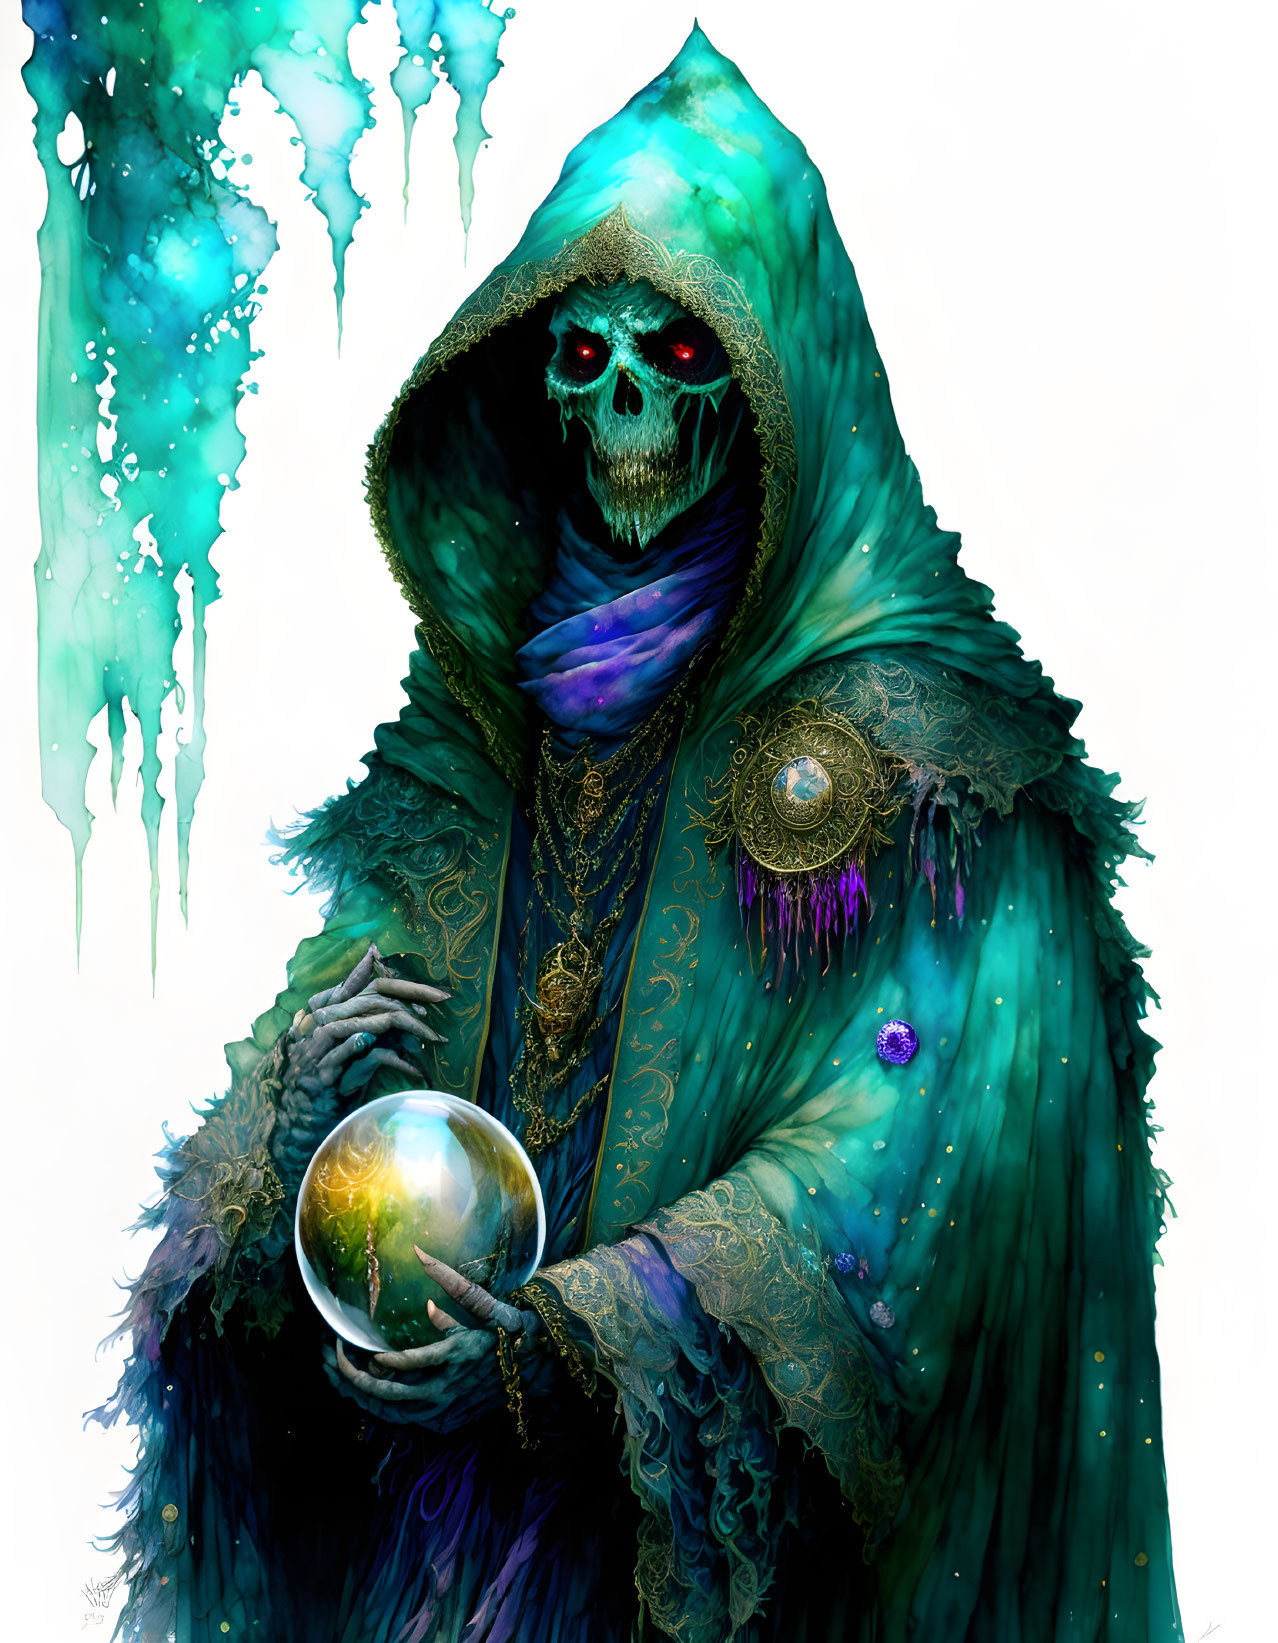 Mysterious robed figure with skeletal face and glowing orb surrounded by blue drips